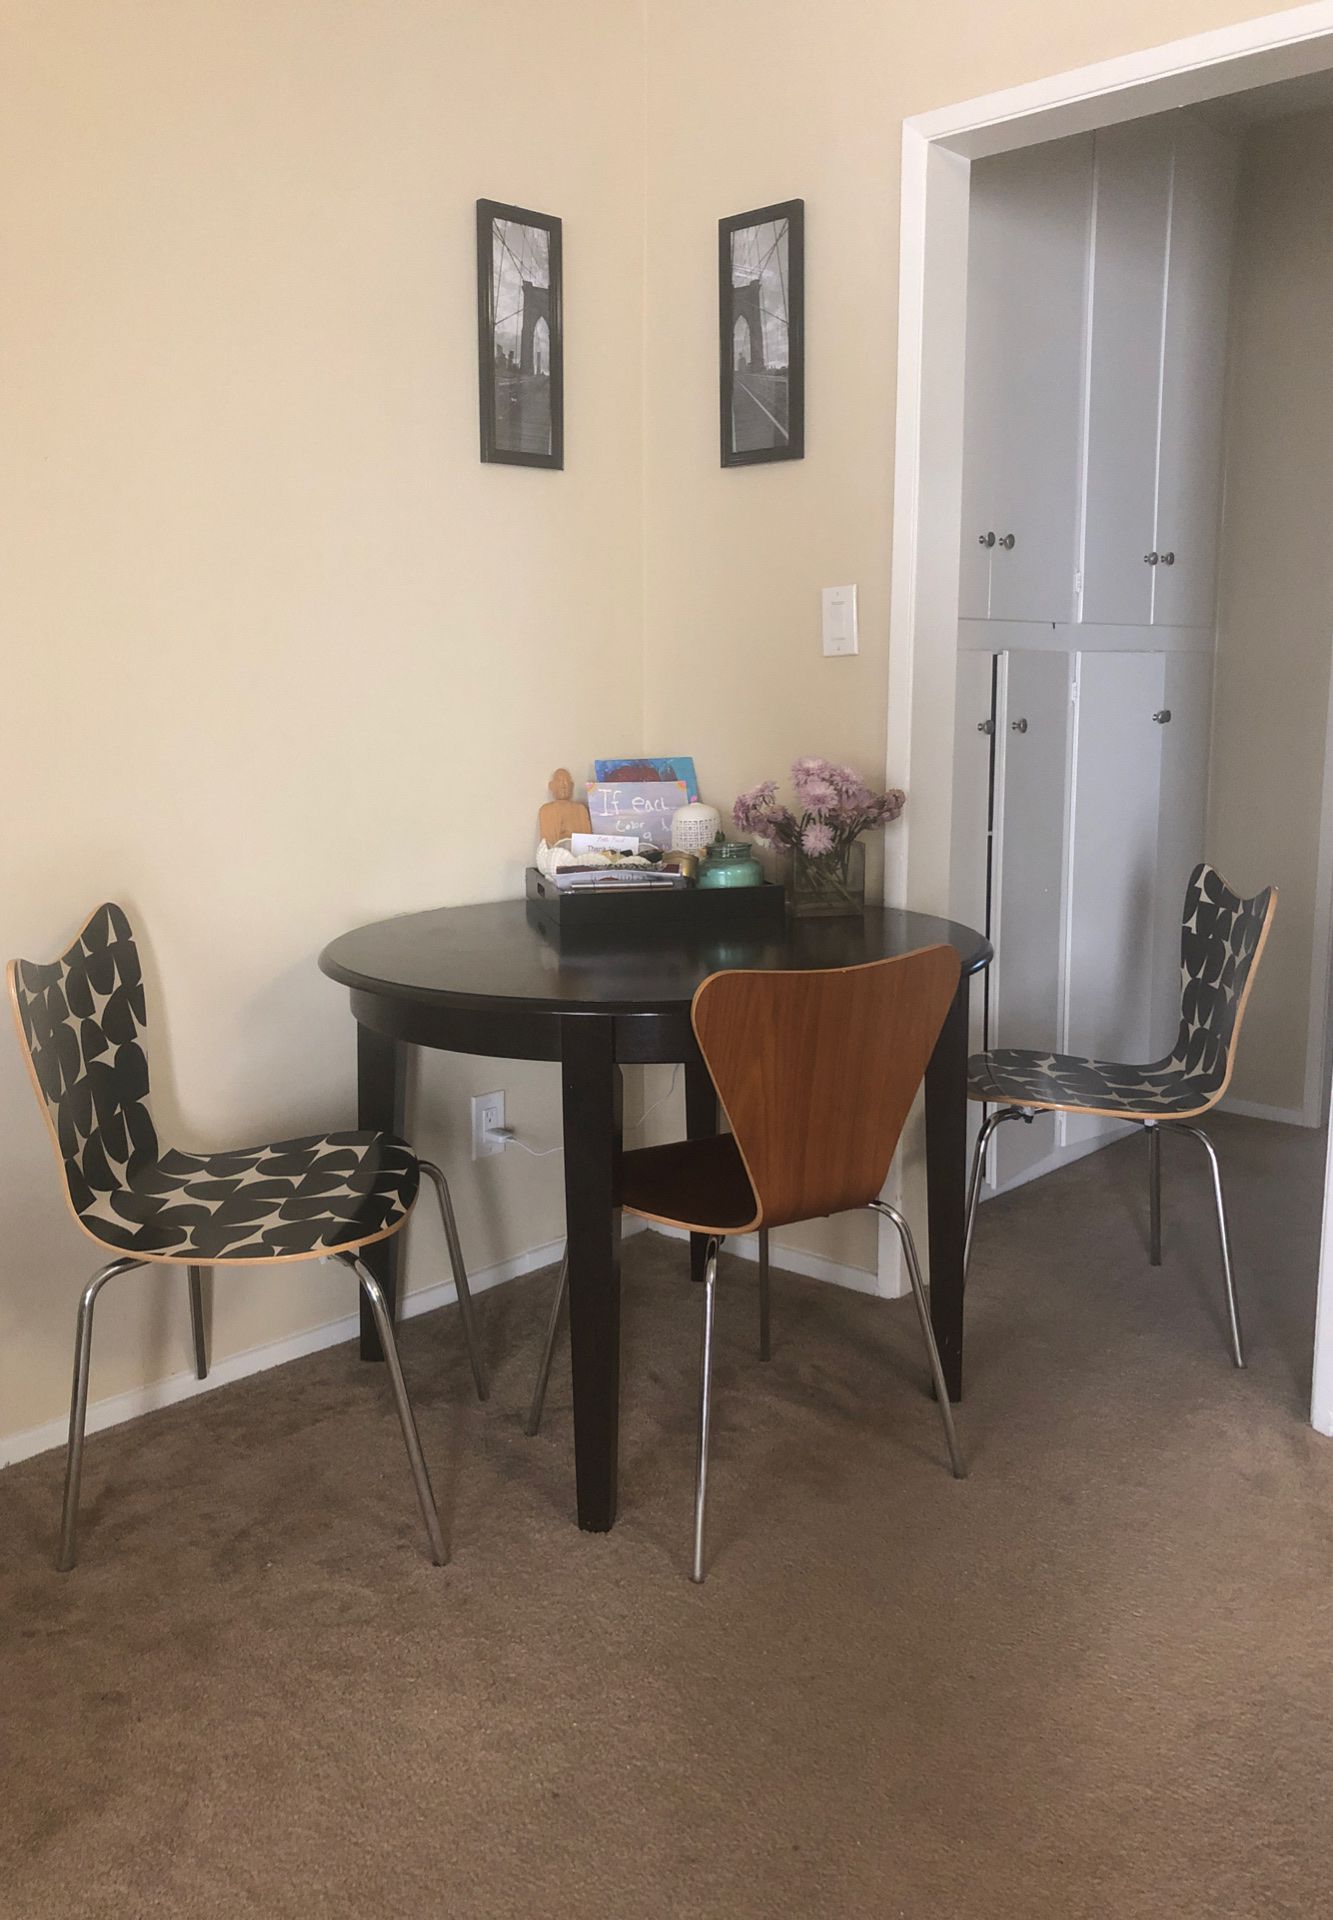 Perfect Kitchen Table & 4 Chairs must go by Aug 27!